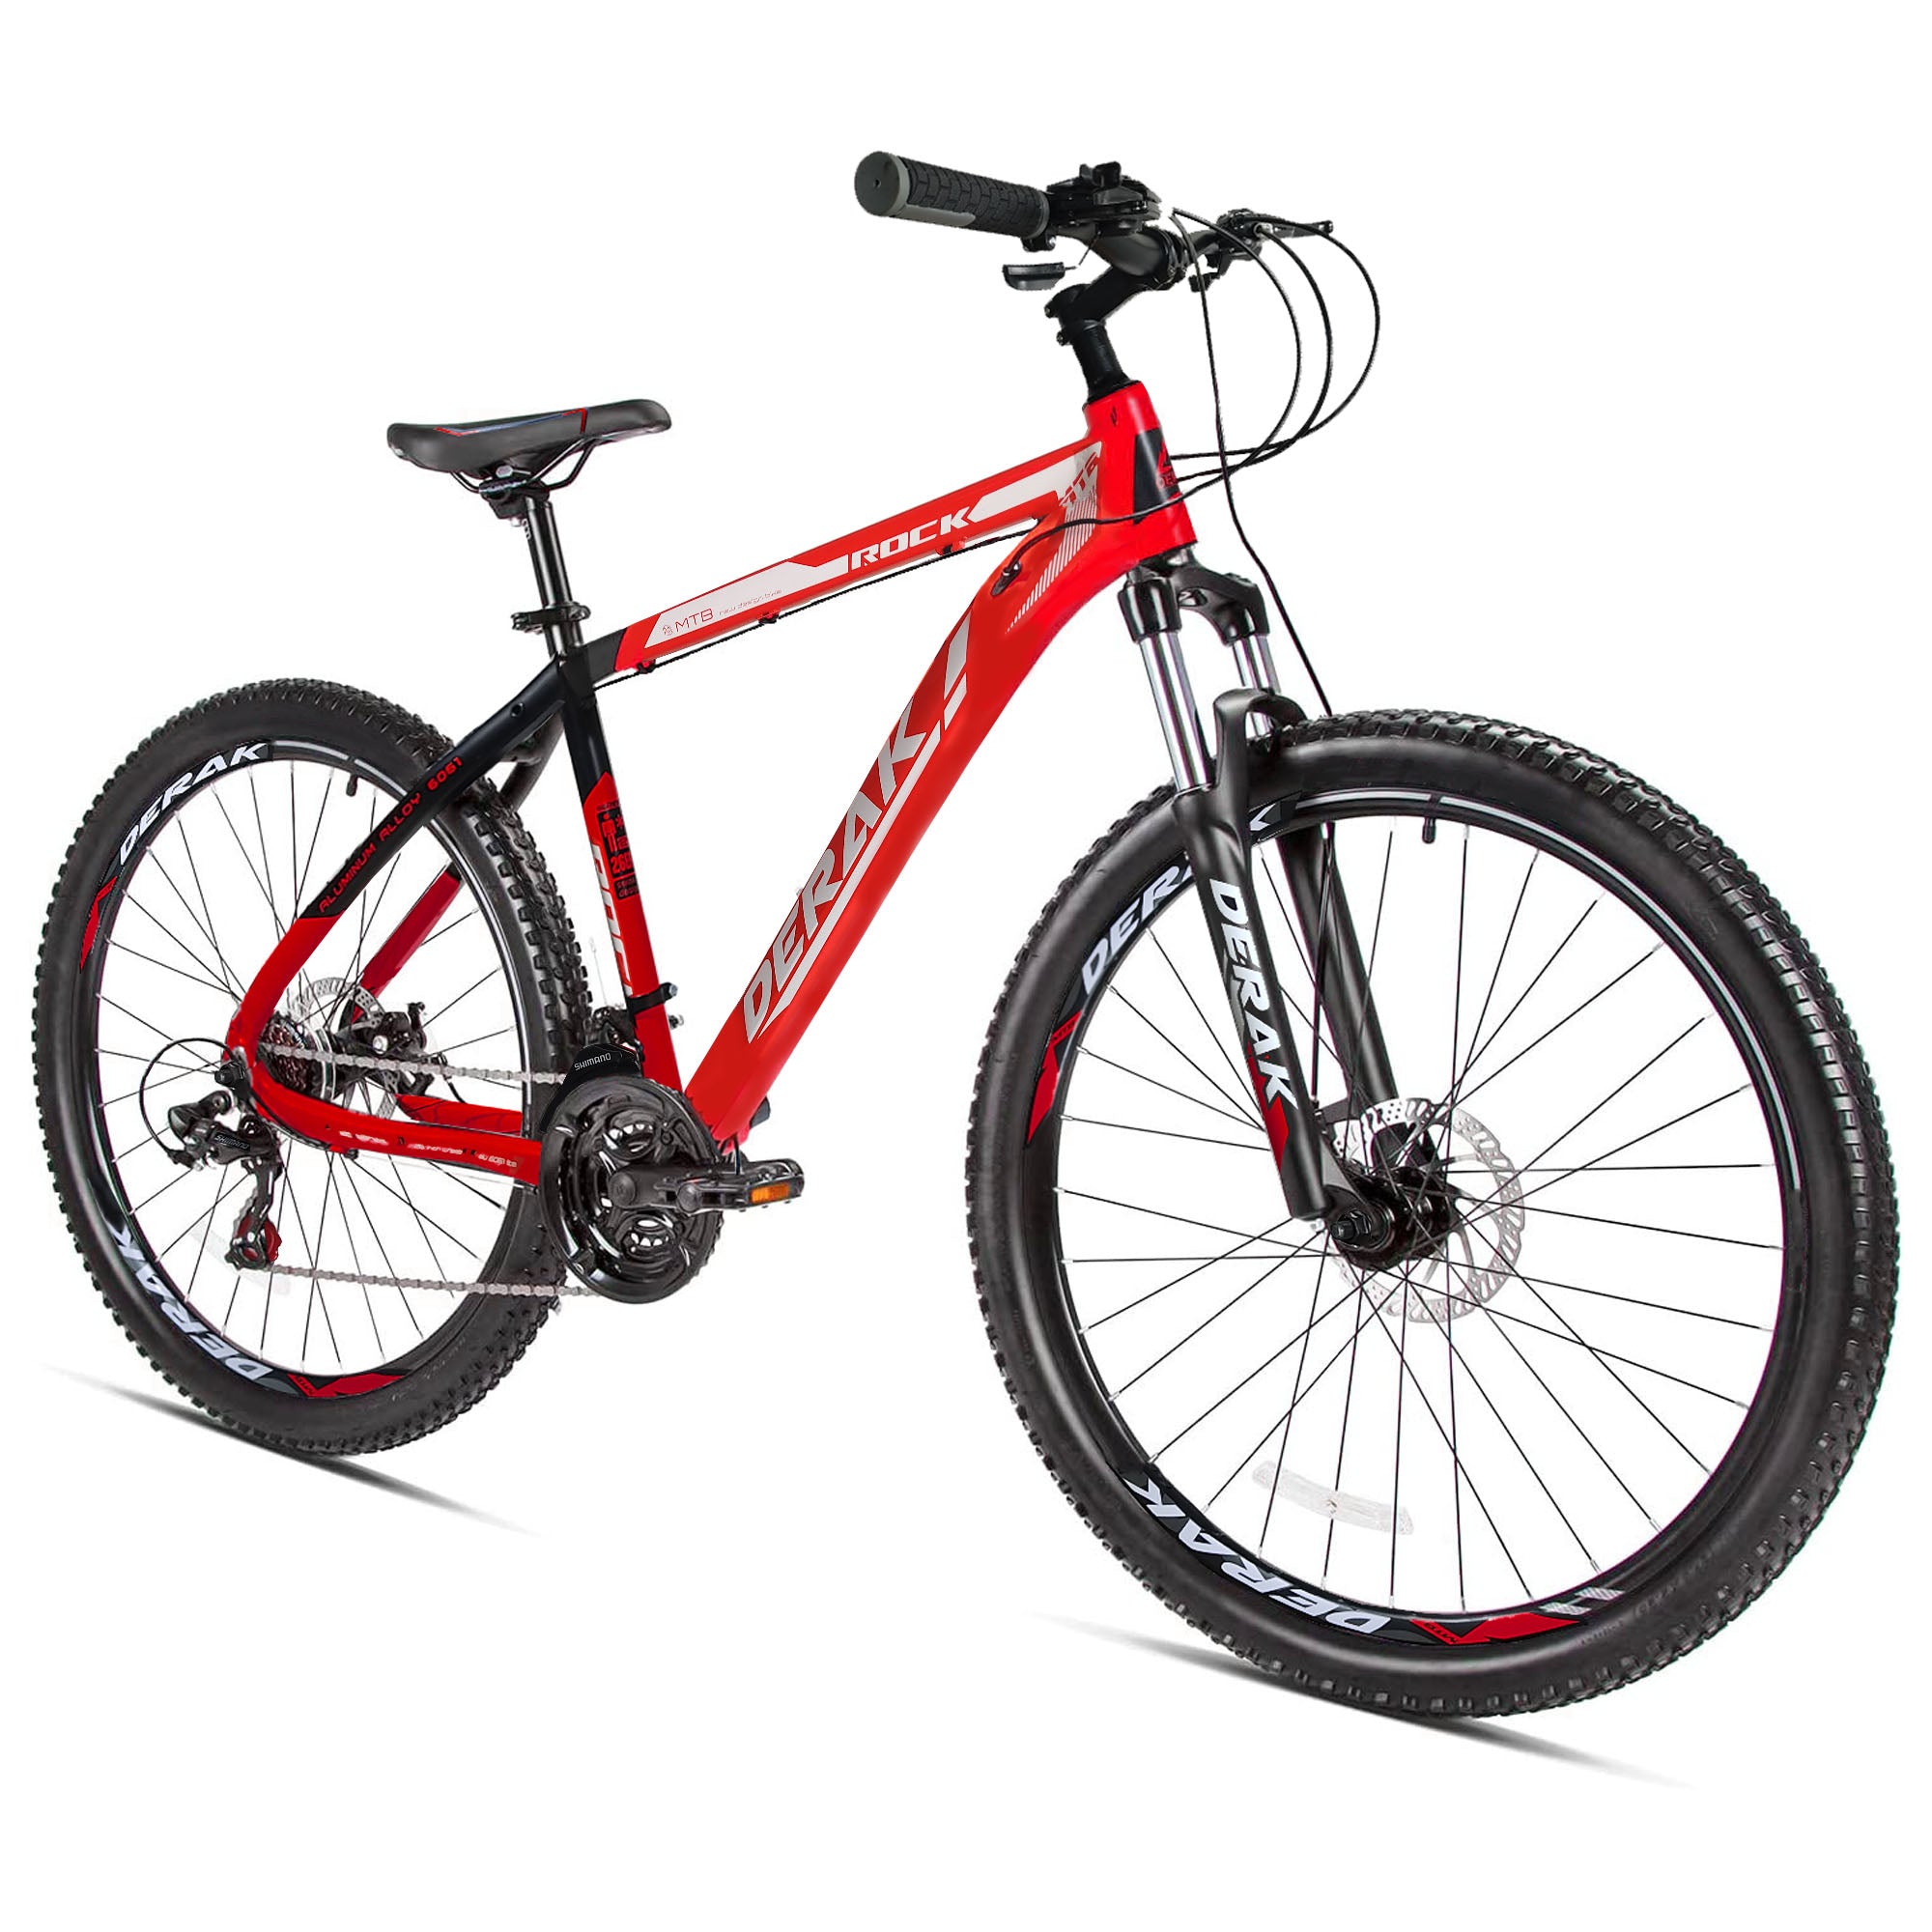 Rock Aluminum Bicycle Adults 26 Inch Red (100% Assembled)